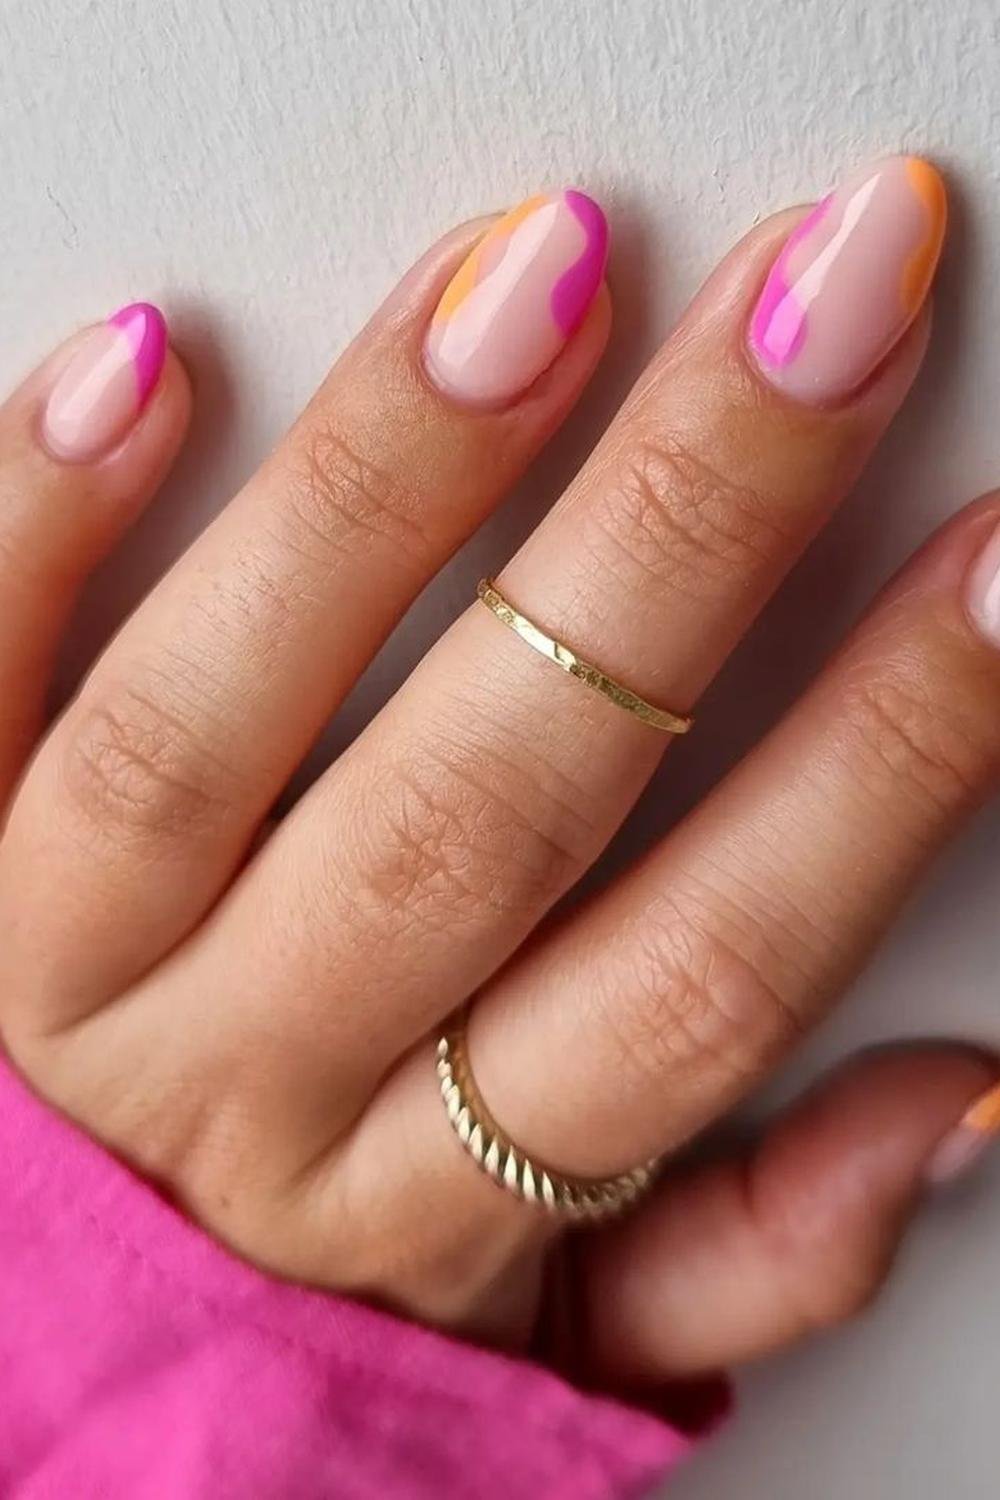 14 - Picture of Pink and Orange Nails